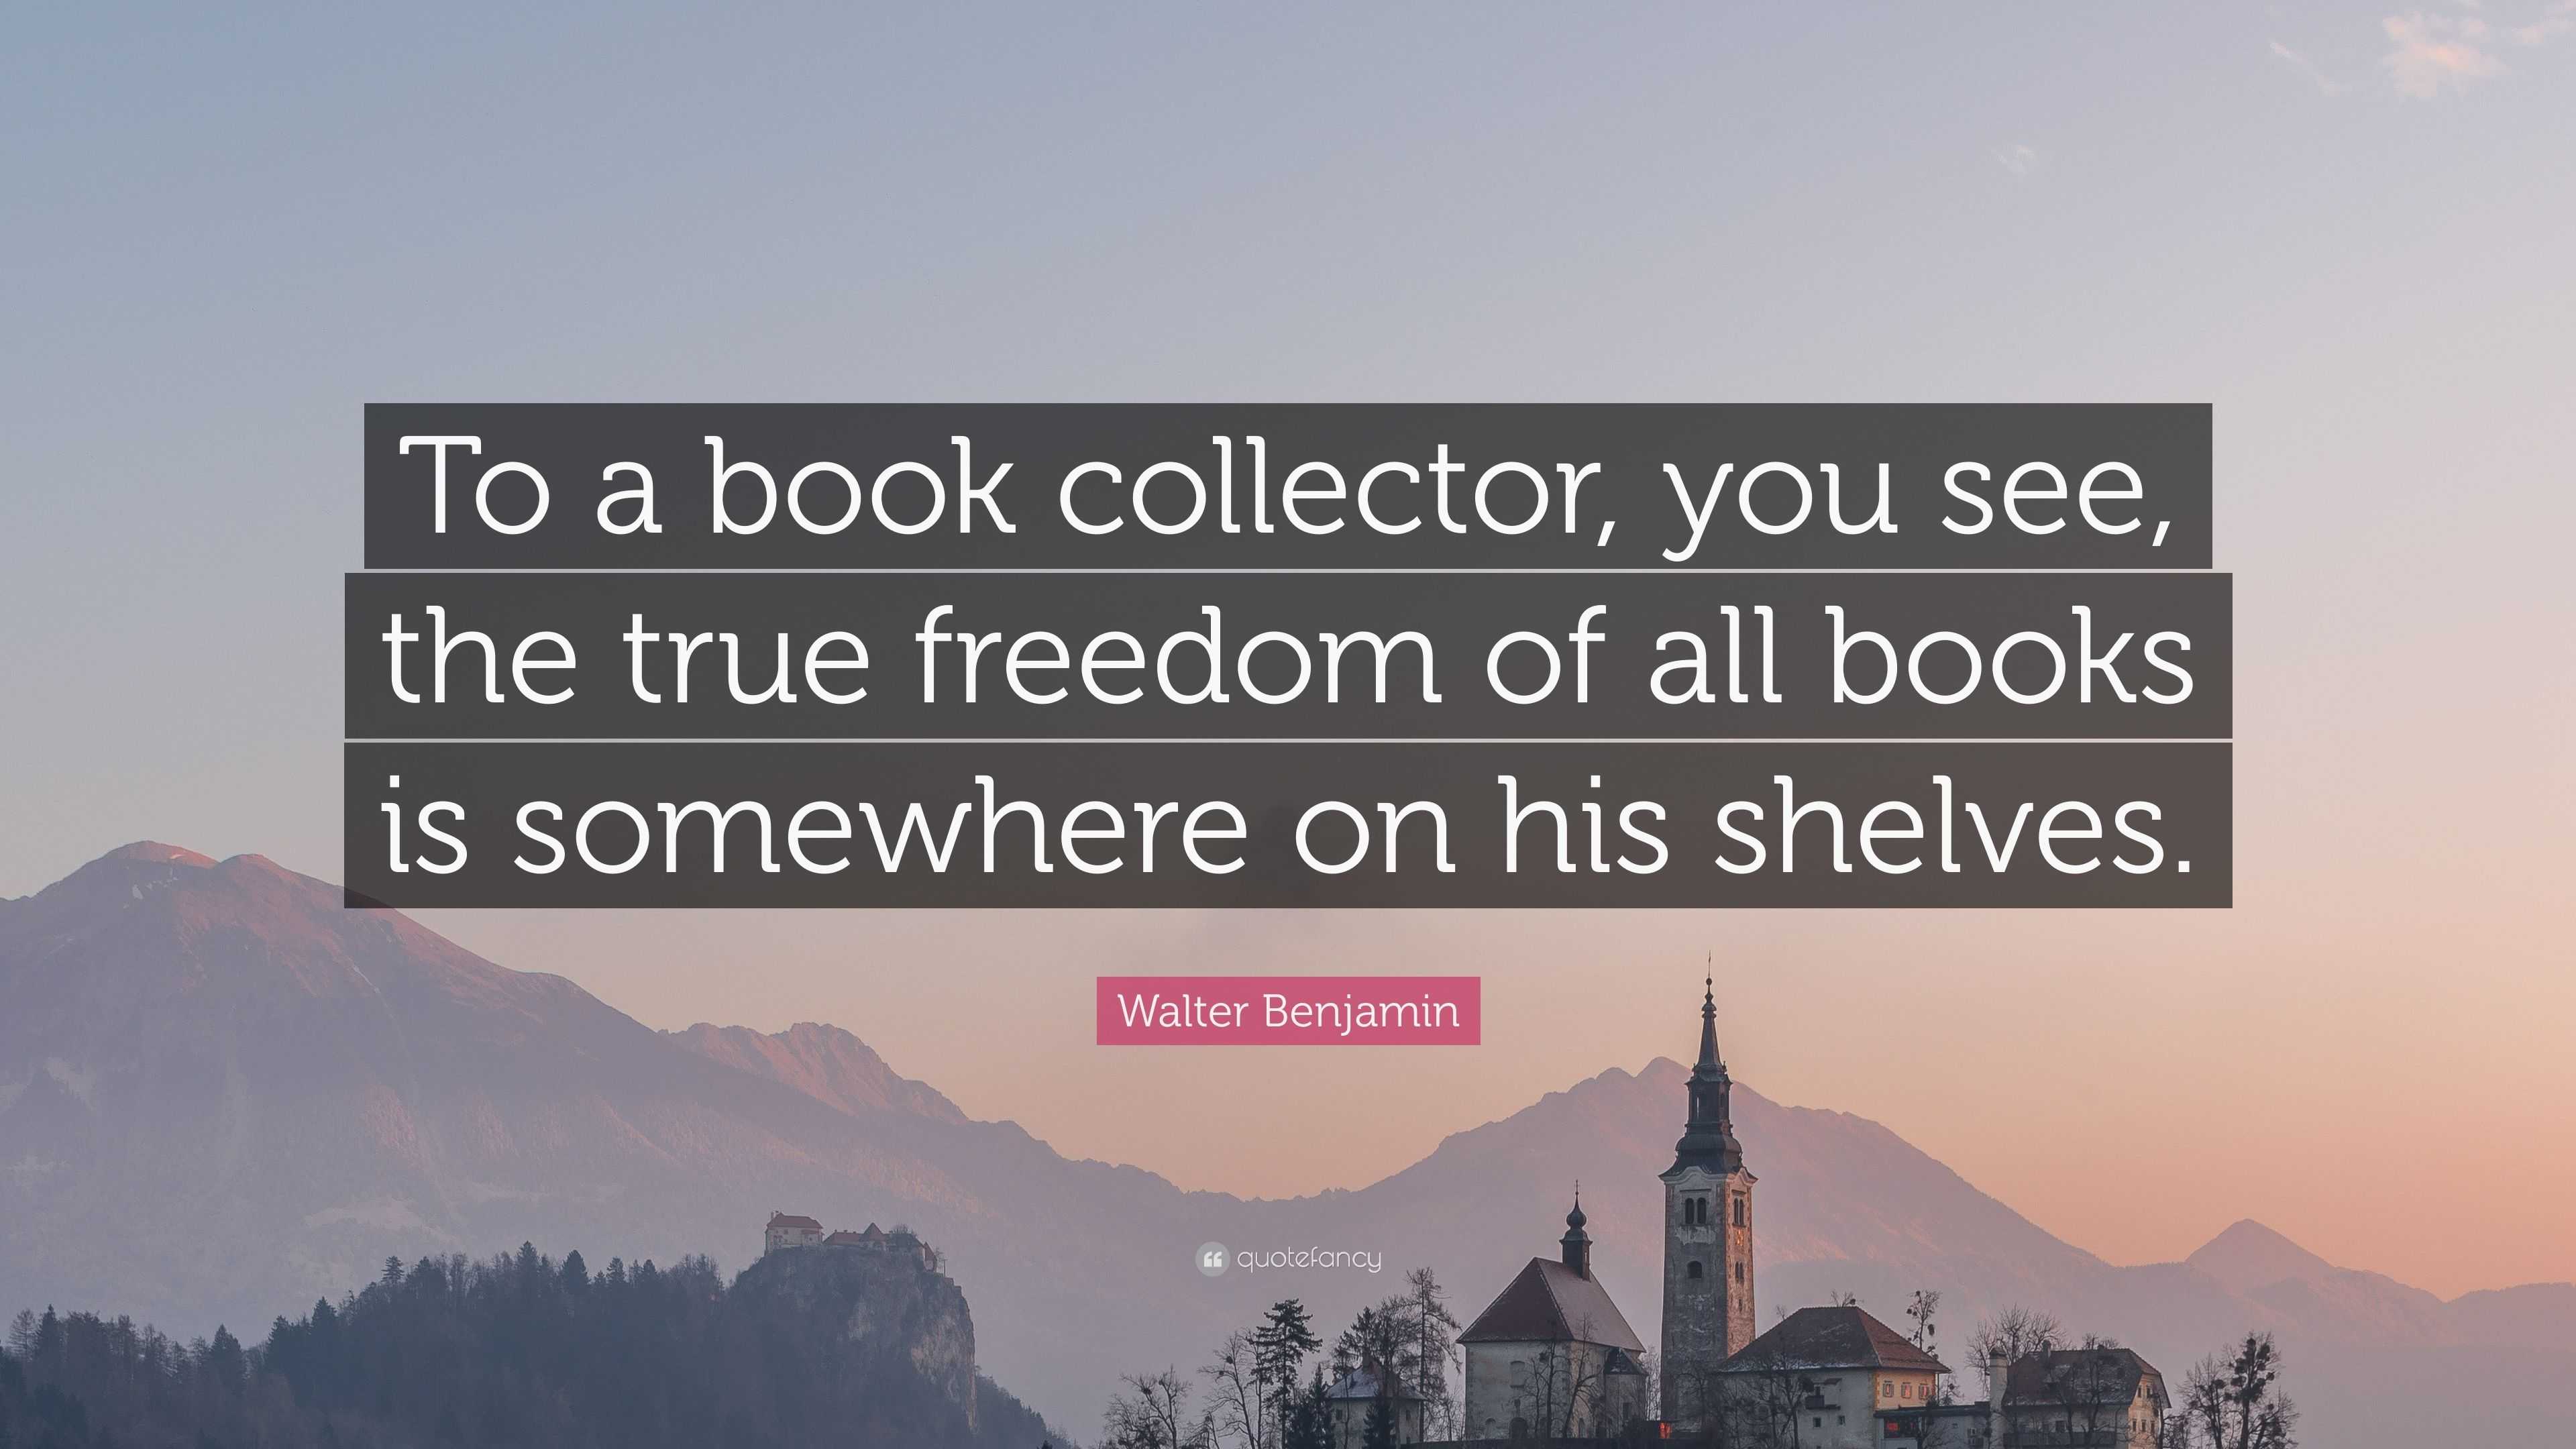 Walter Benjamin Quote: “To a book collector, you see, the true freedom ...